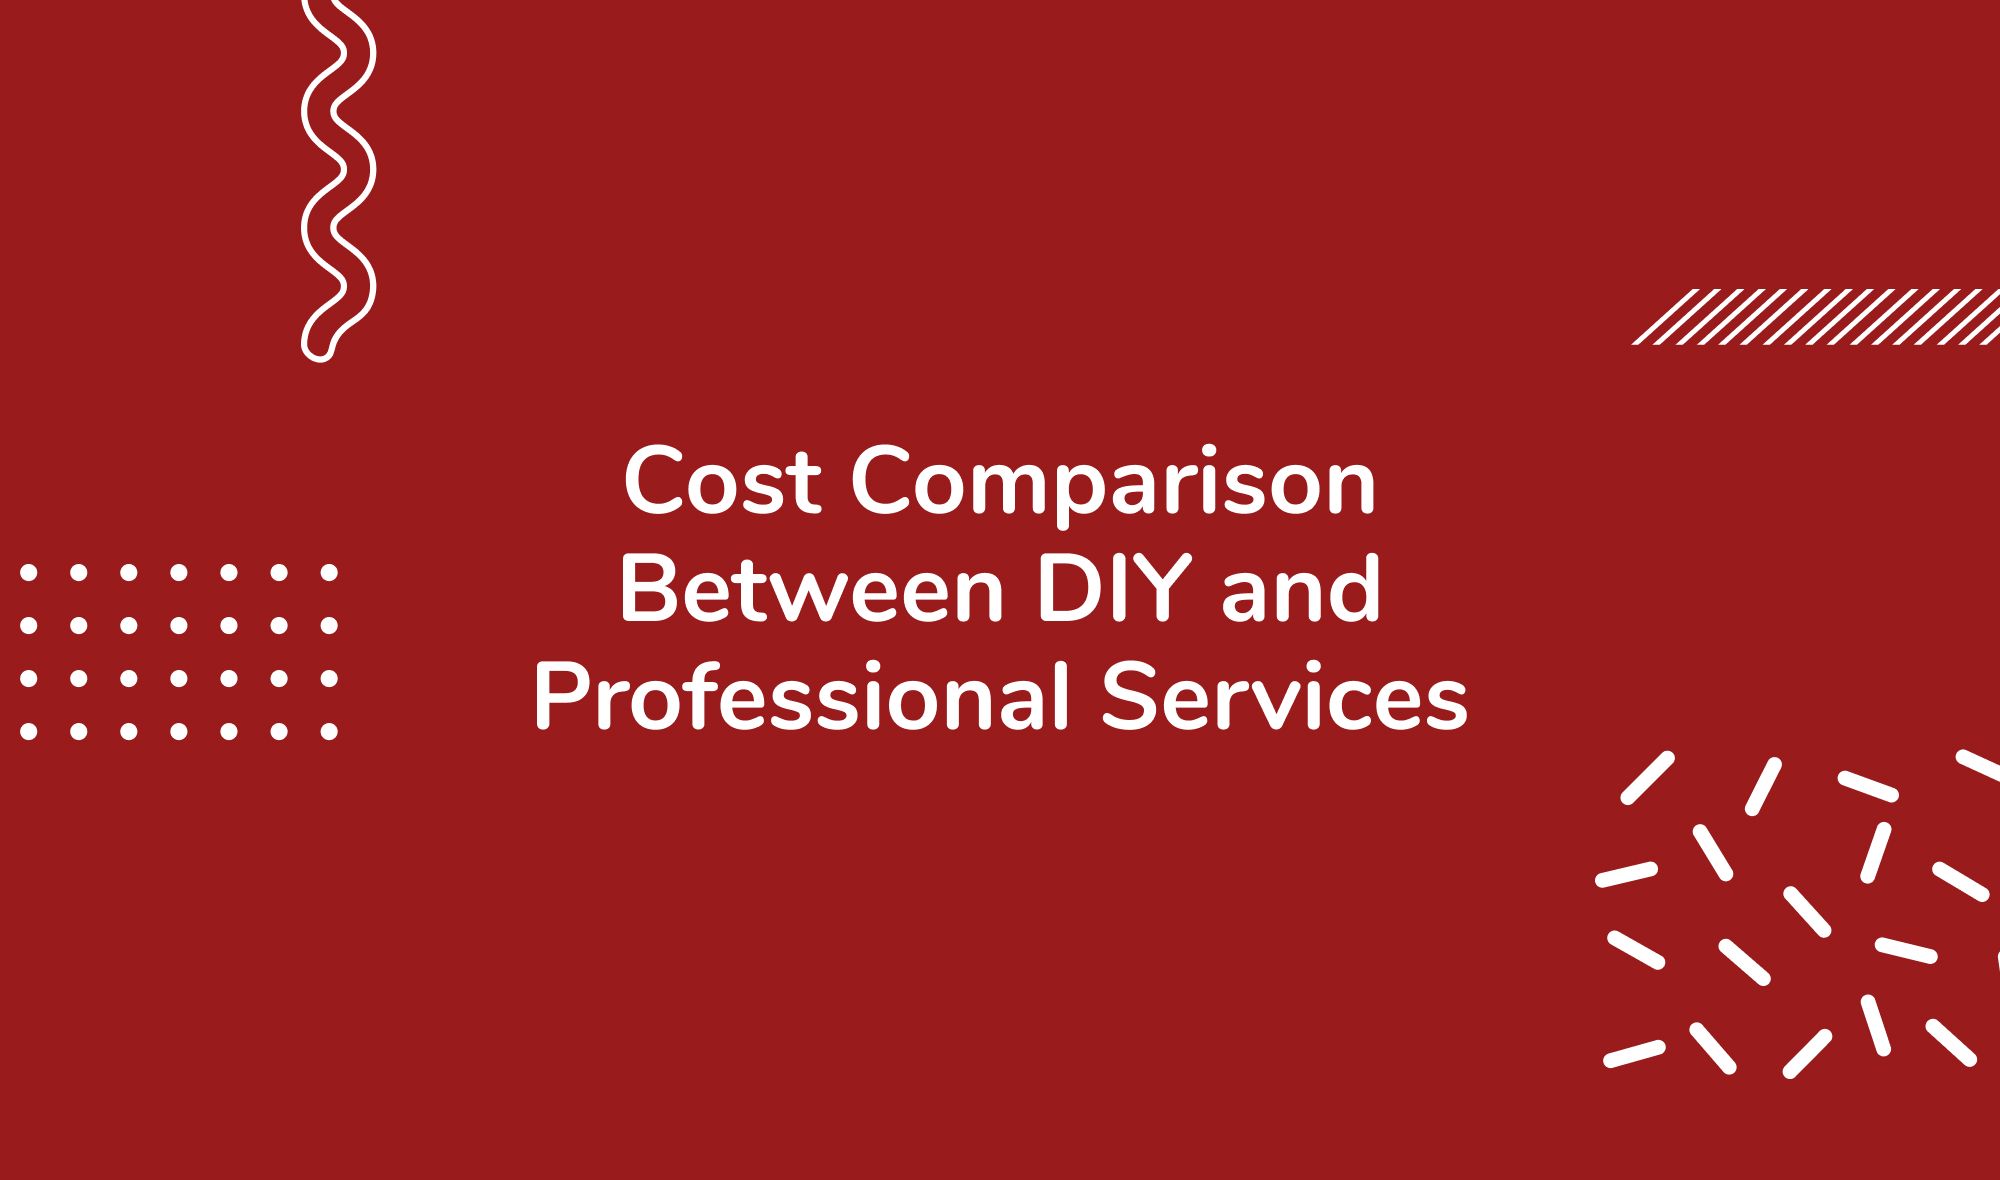 Cost Comparison Between DIY and Professional Services